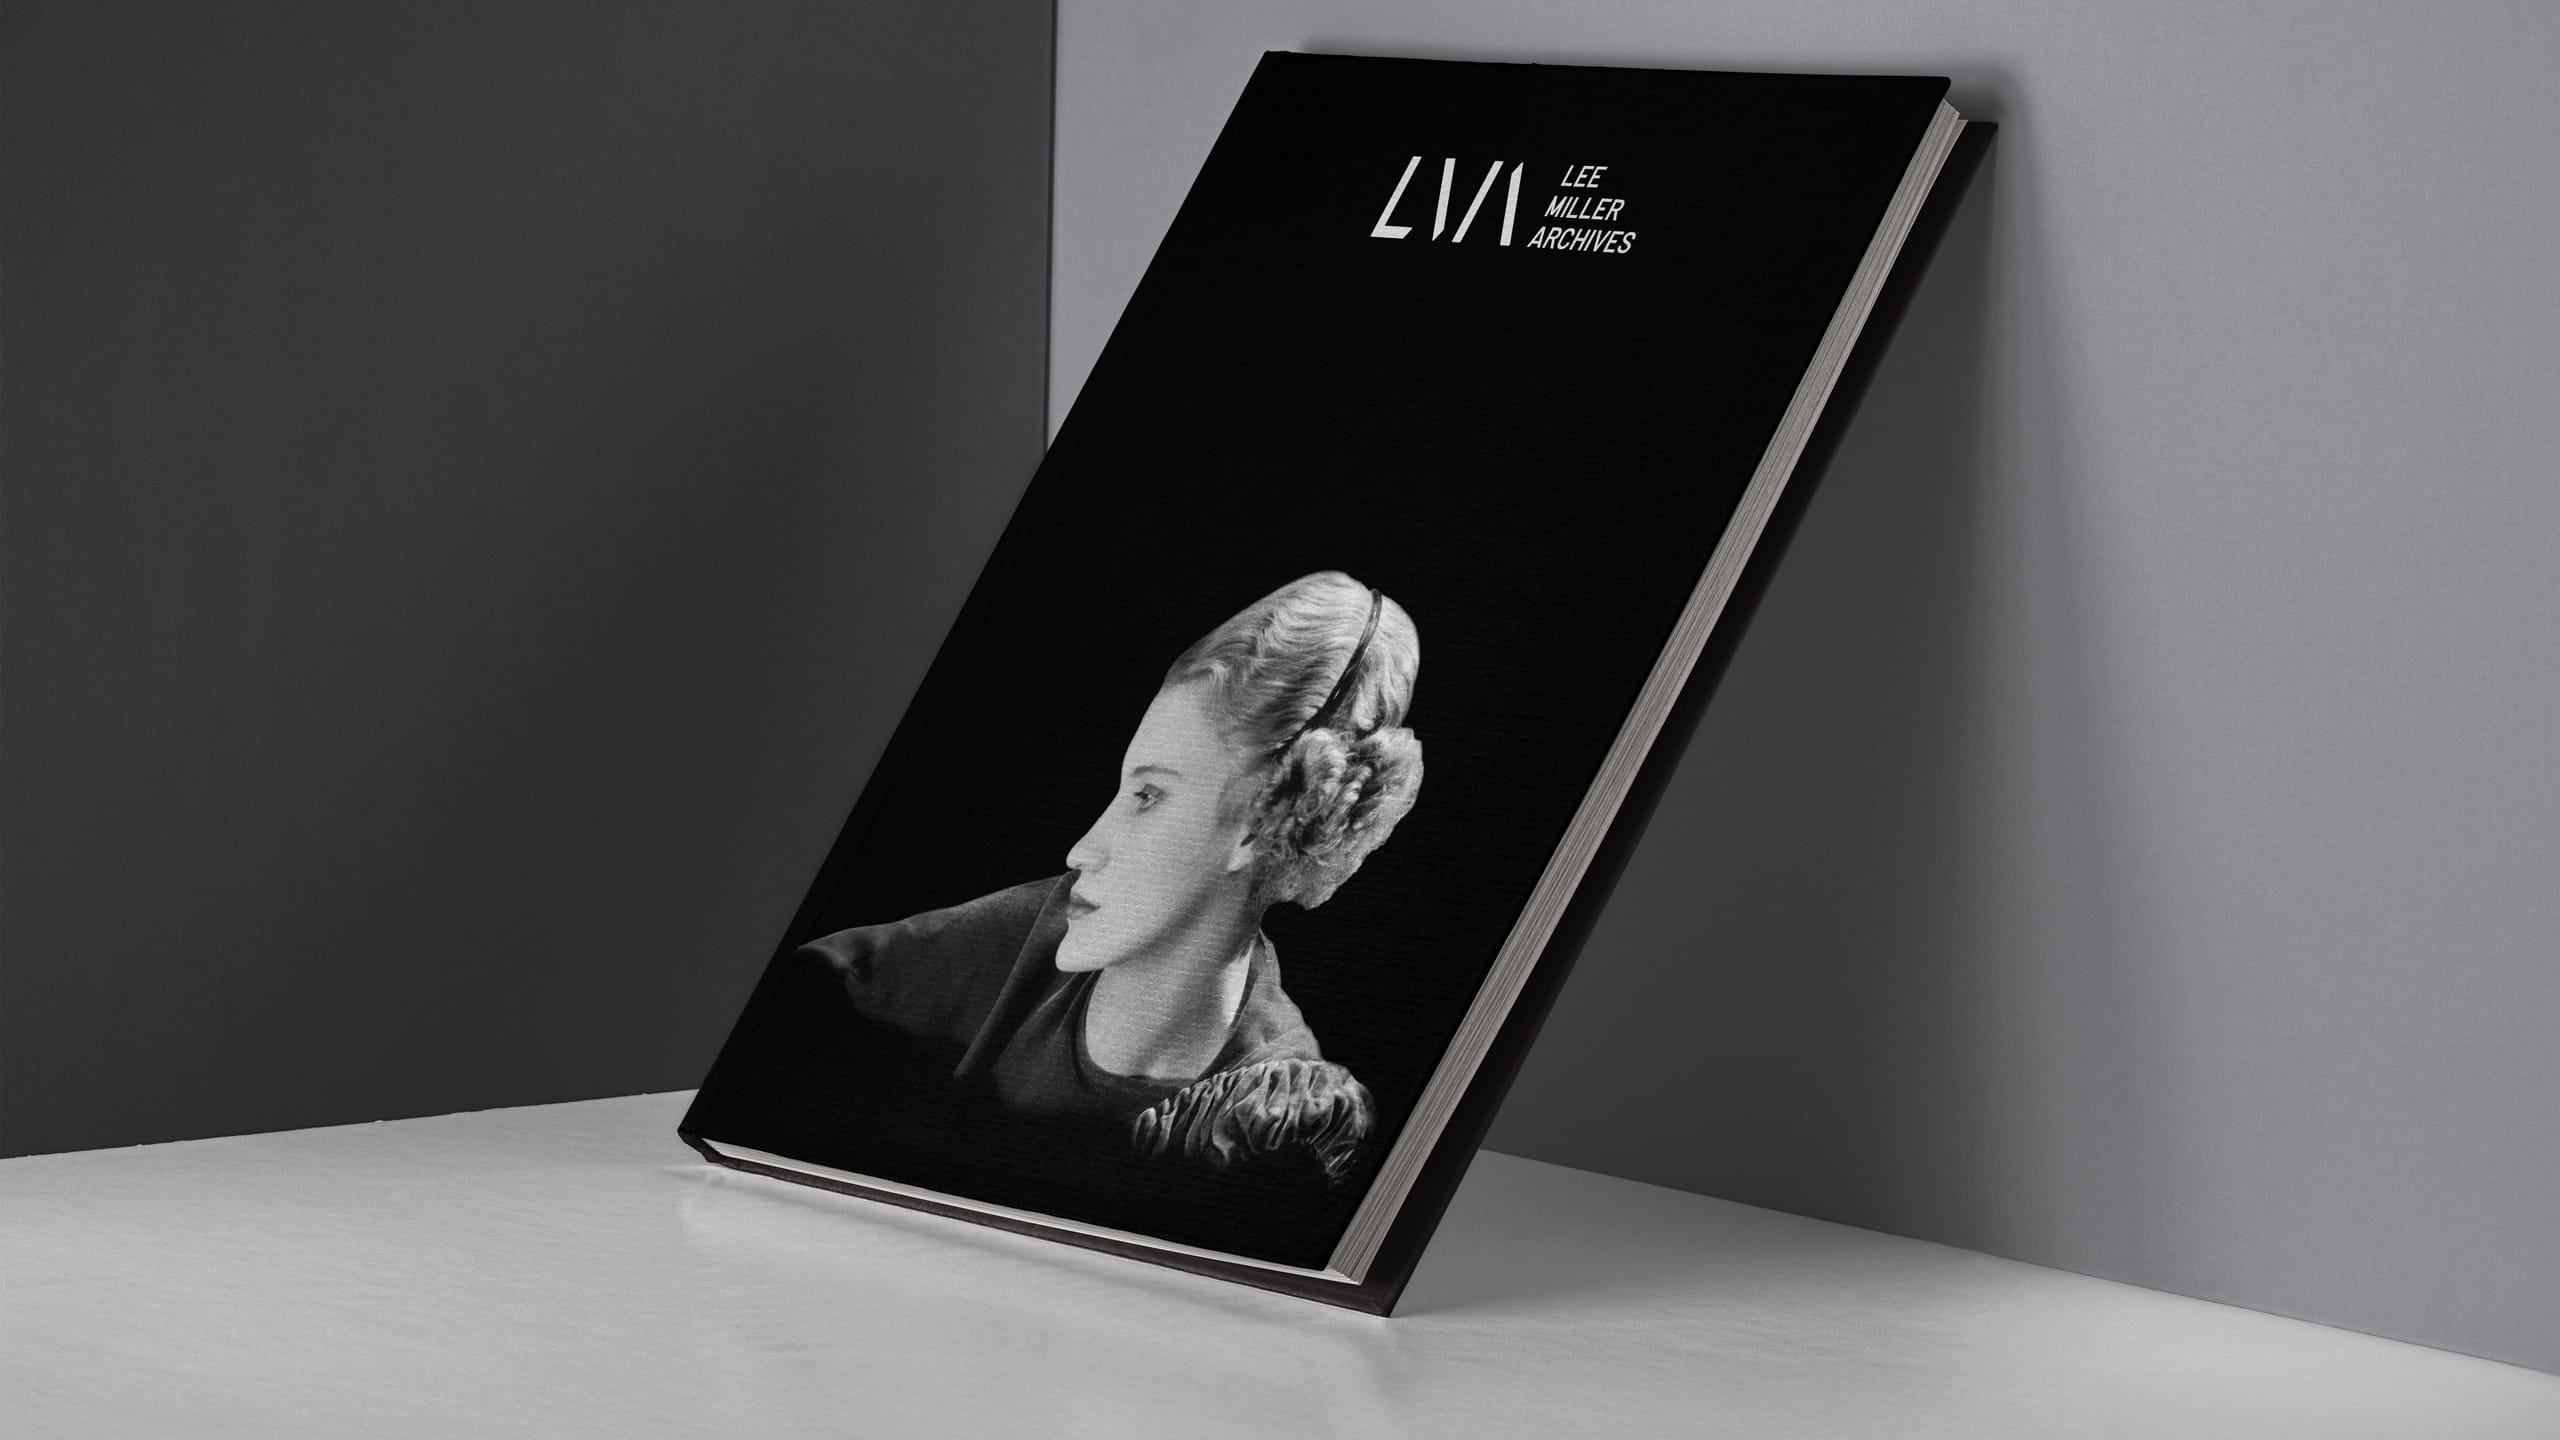 Lee Miller Archives Visual identity, Website design and development